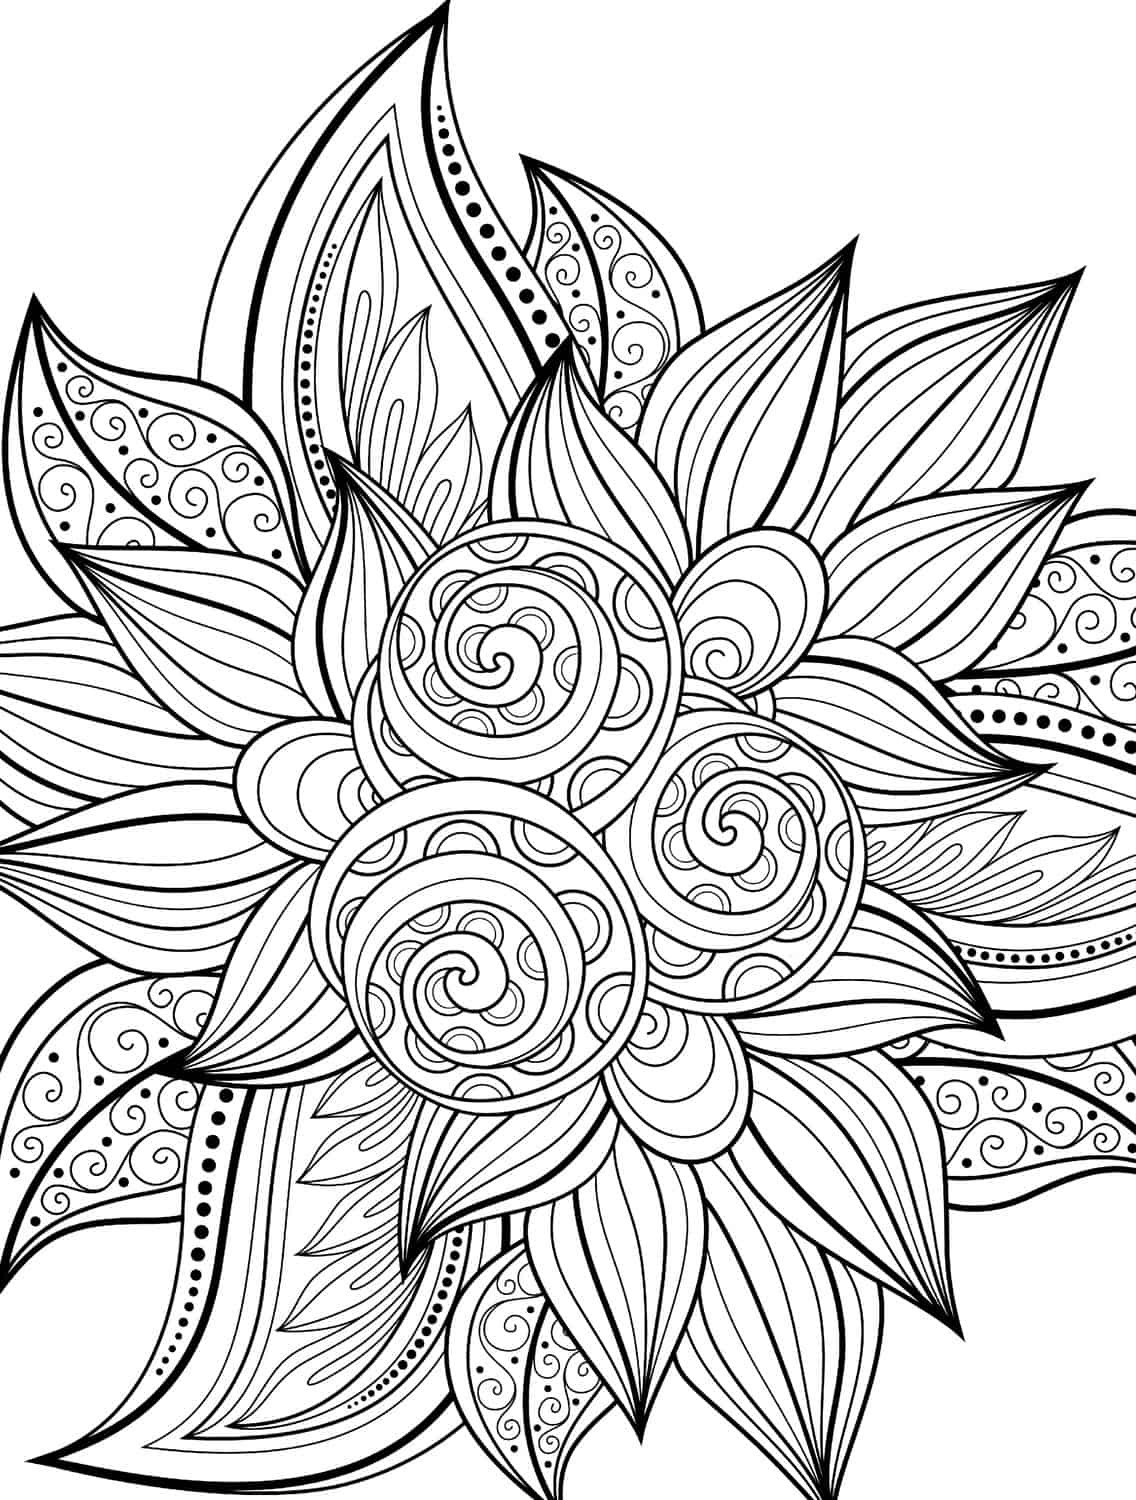 Adult Coloring Pages Pdf Free
 10 Free Printable Holiday Adult Coloring Pages